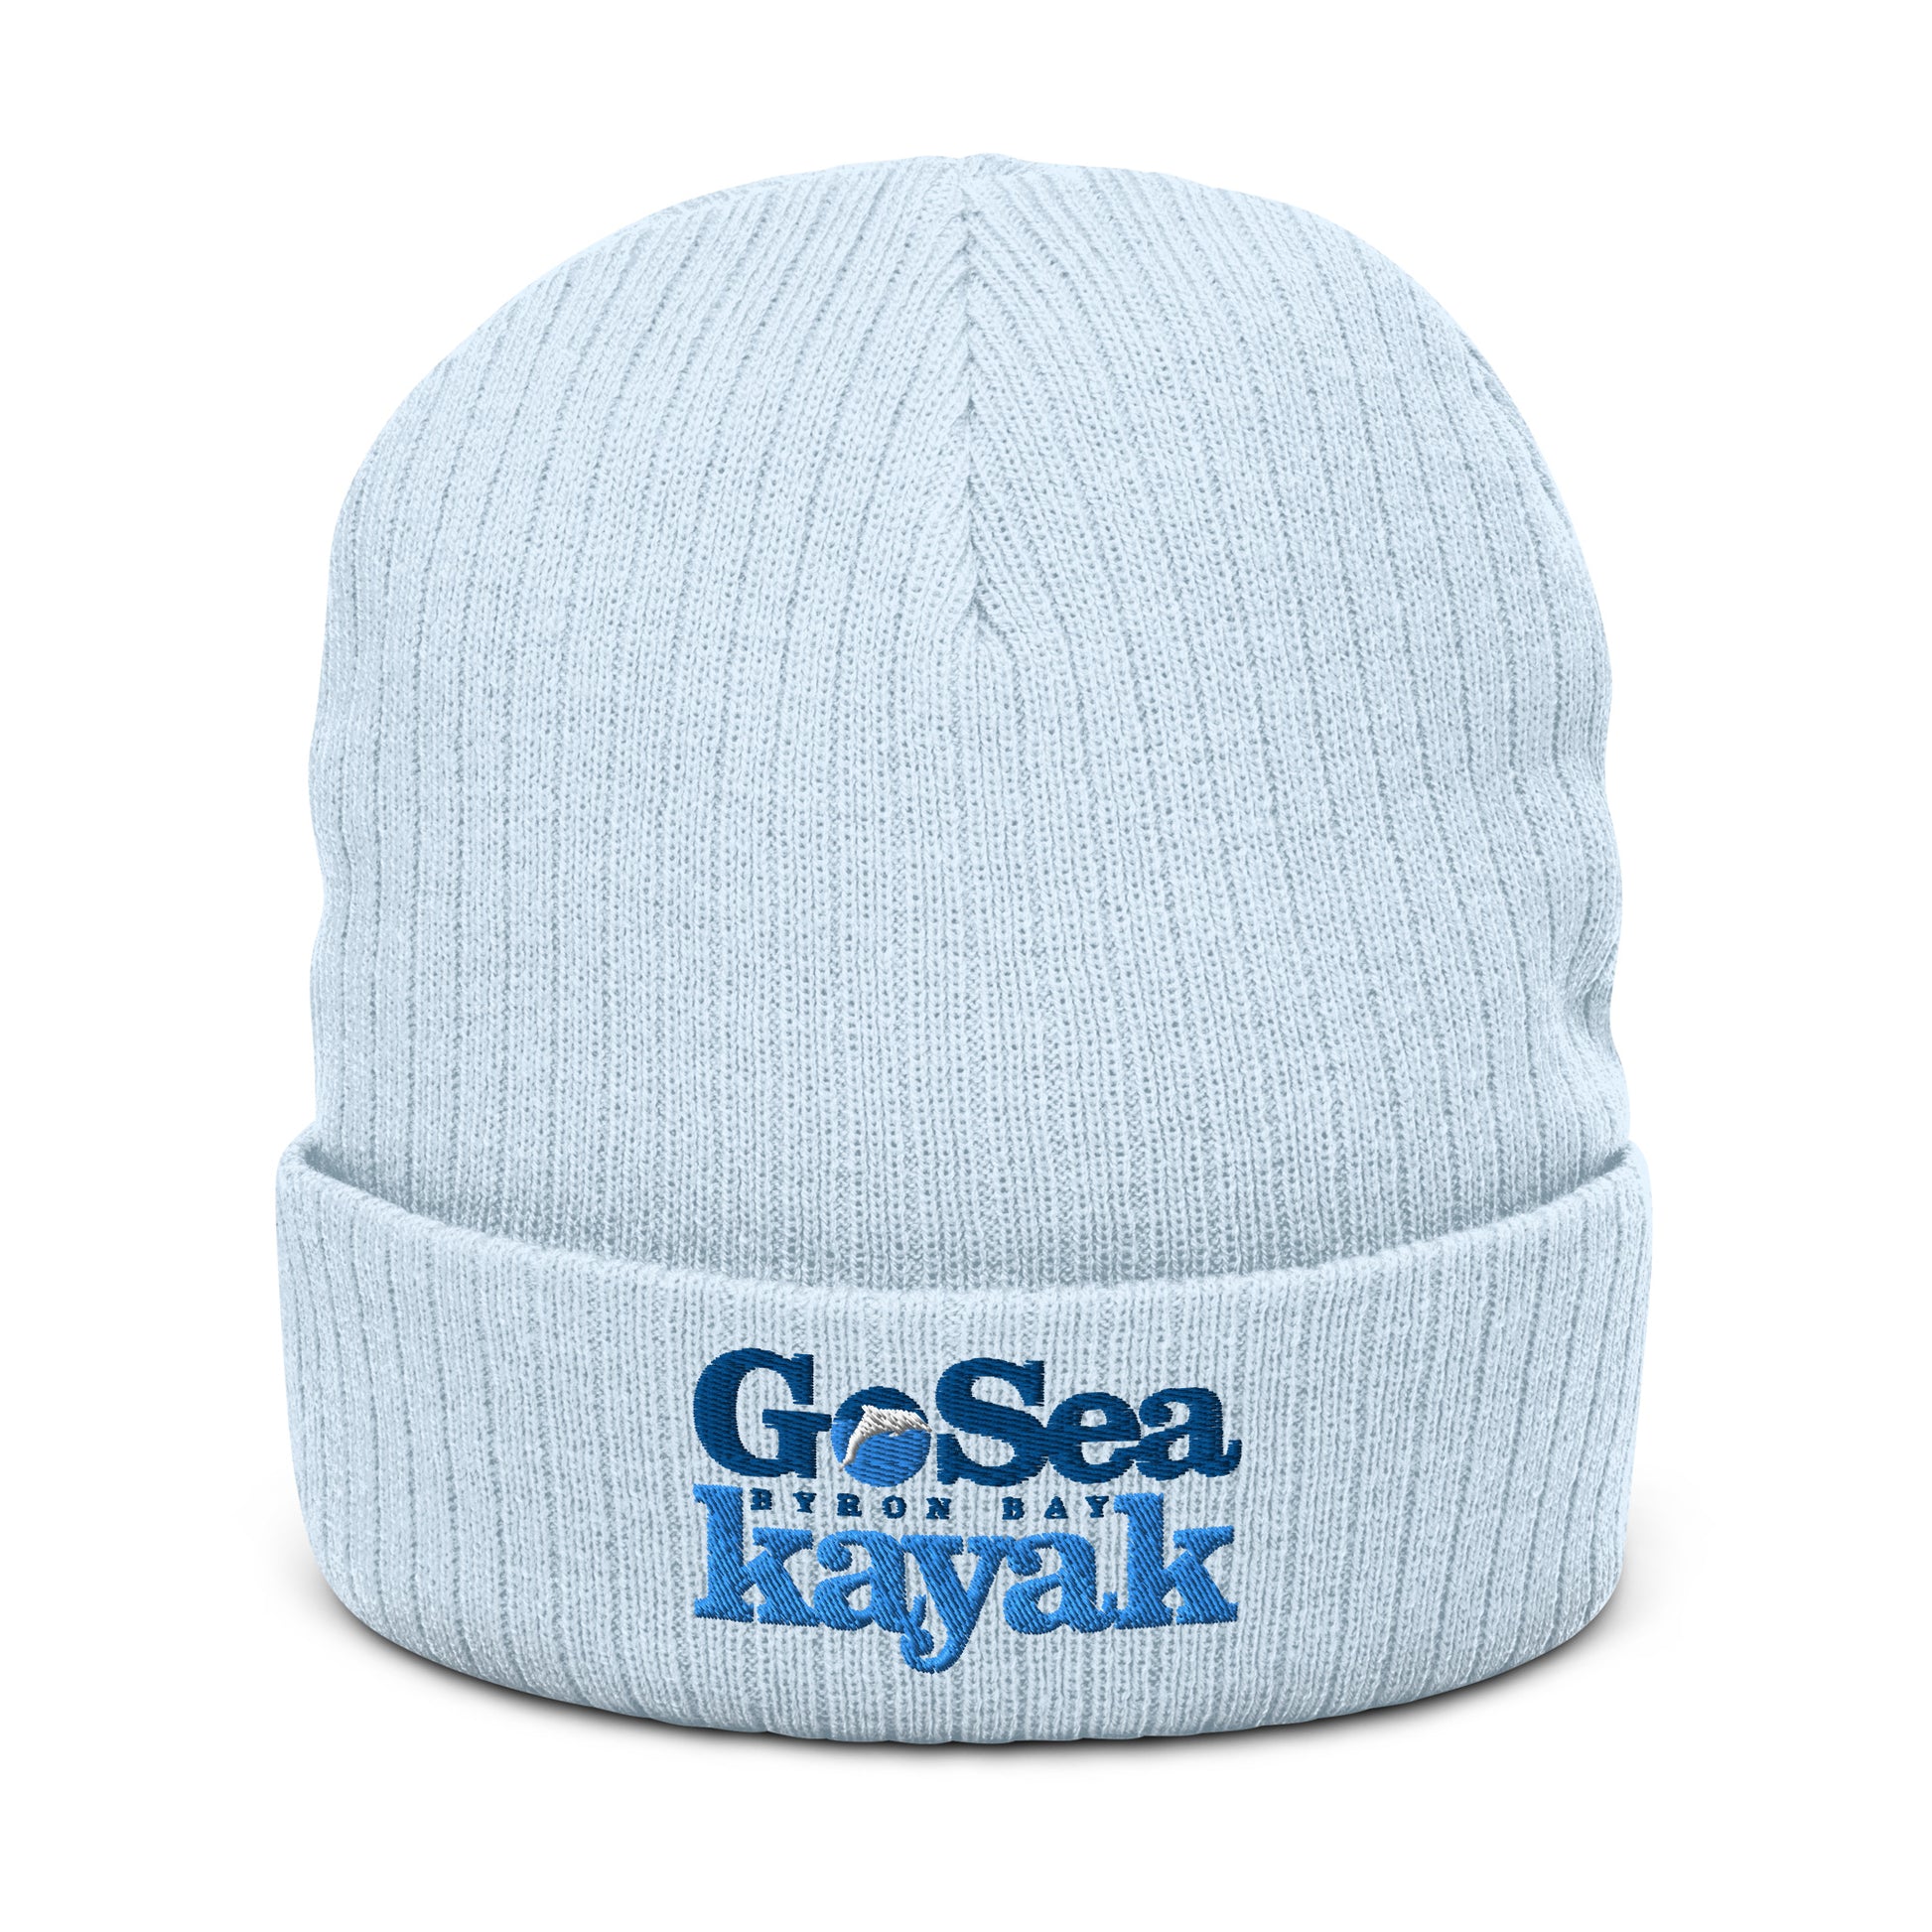  Ribbed Knit Beanie - Recycled polyester - Light Blue - Front view - Go Sea Kayak Byron Bay logo on front - Genuine Byron Bay Merchandise | Produced by Go Sea Kayak Byron Bay 